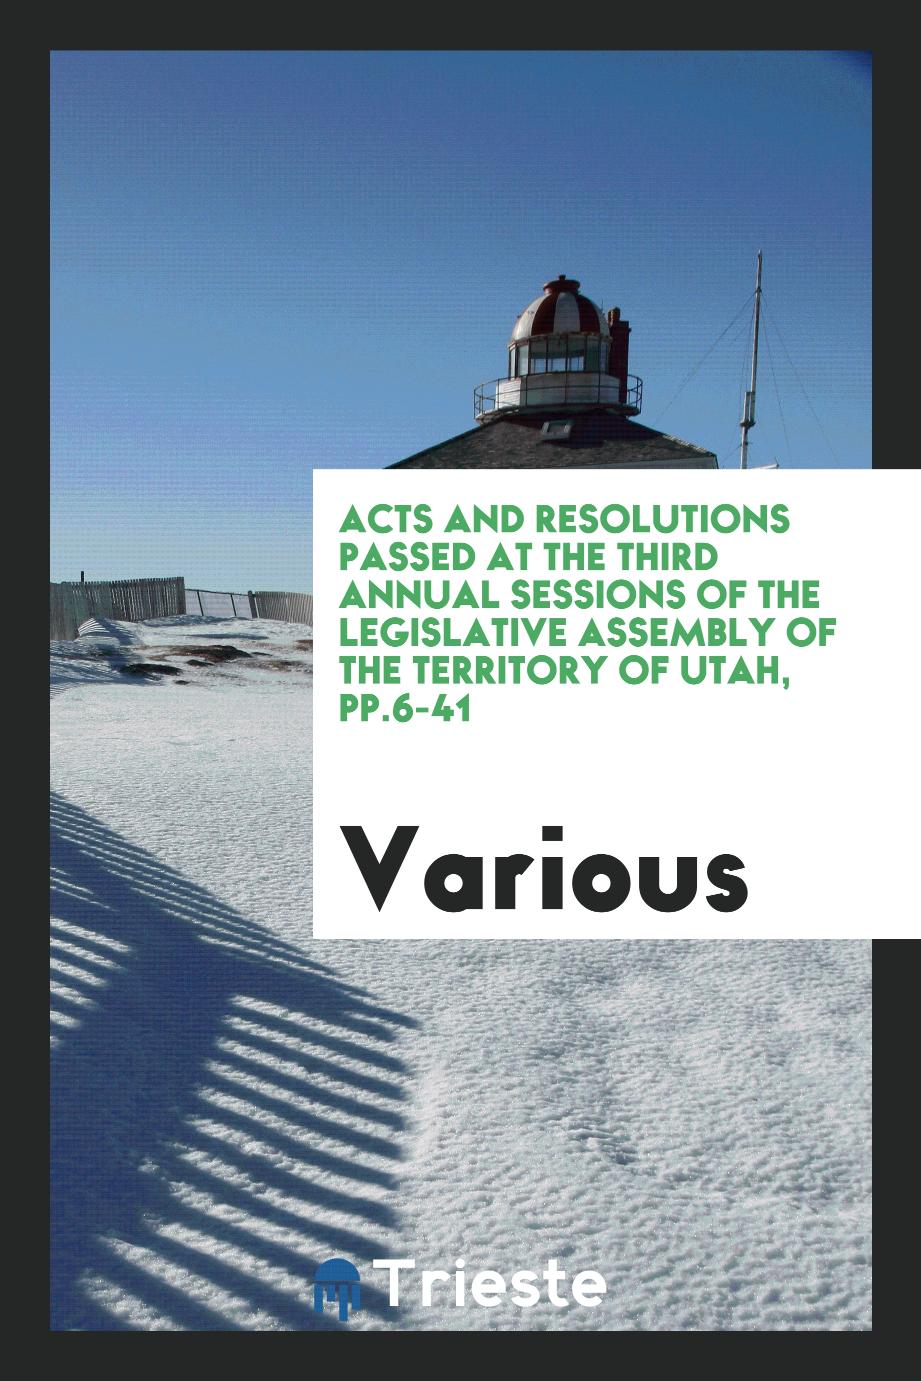 Acts and Resolutions Passed at the Third Annual Sessions of the Legislative Assembly of the Territory of Utah, pp.6-41